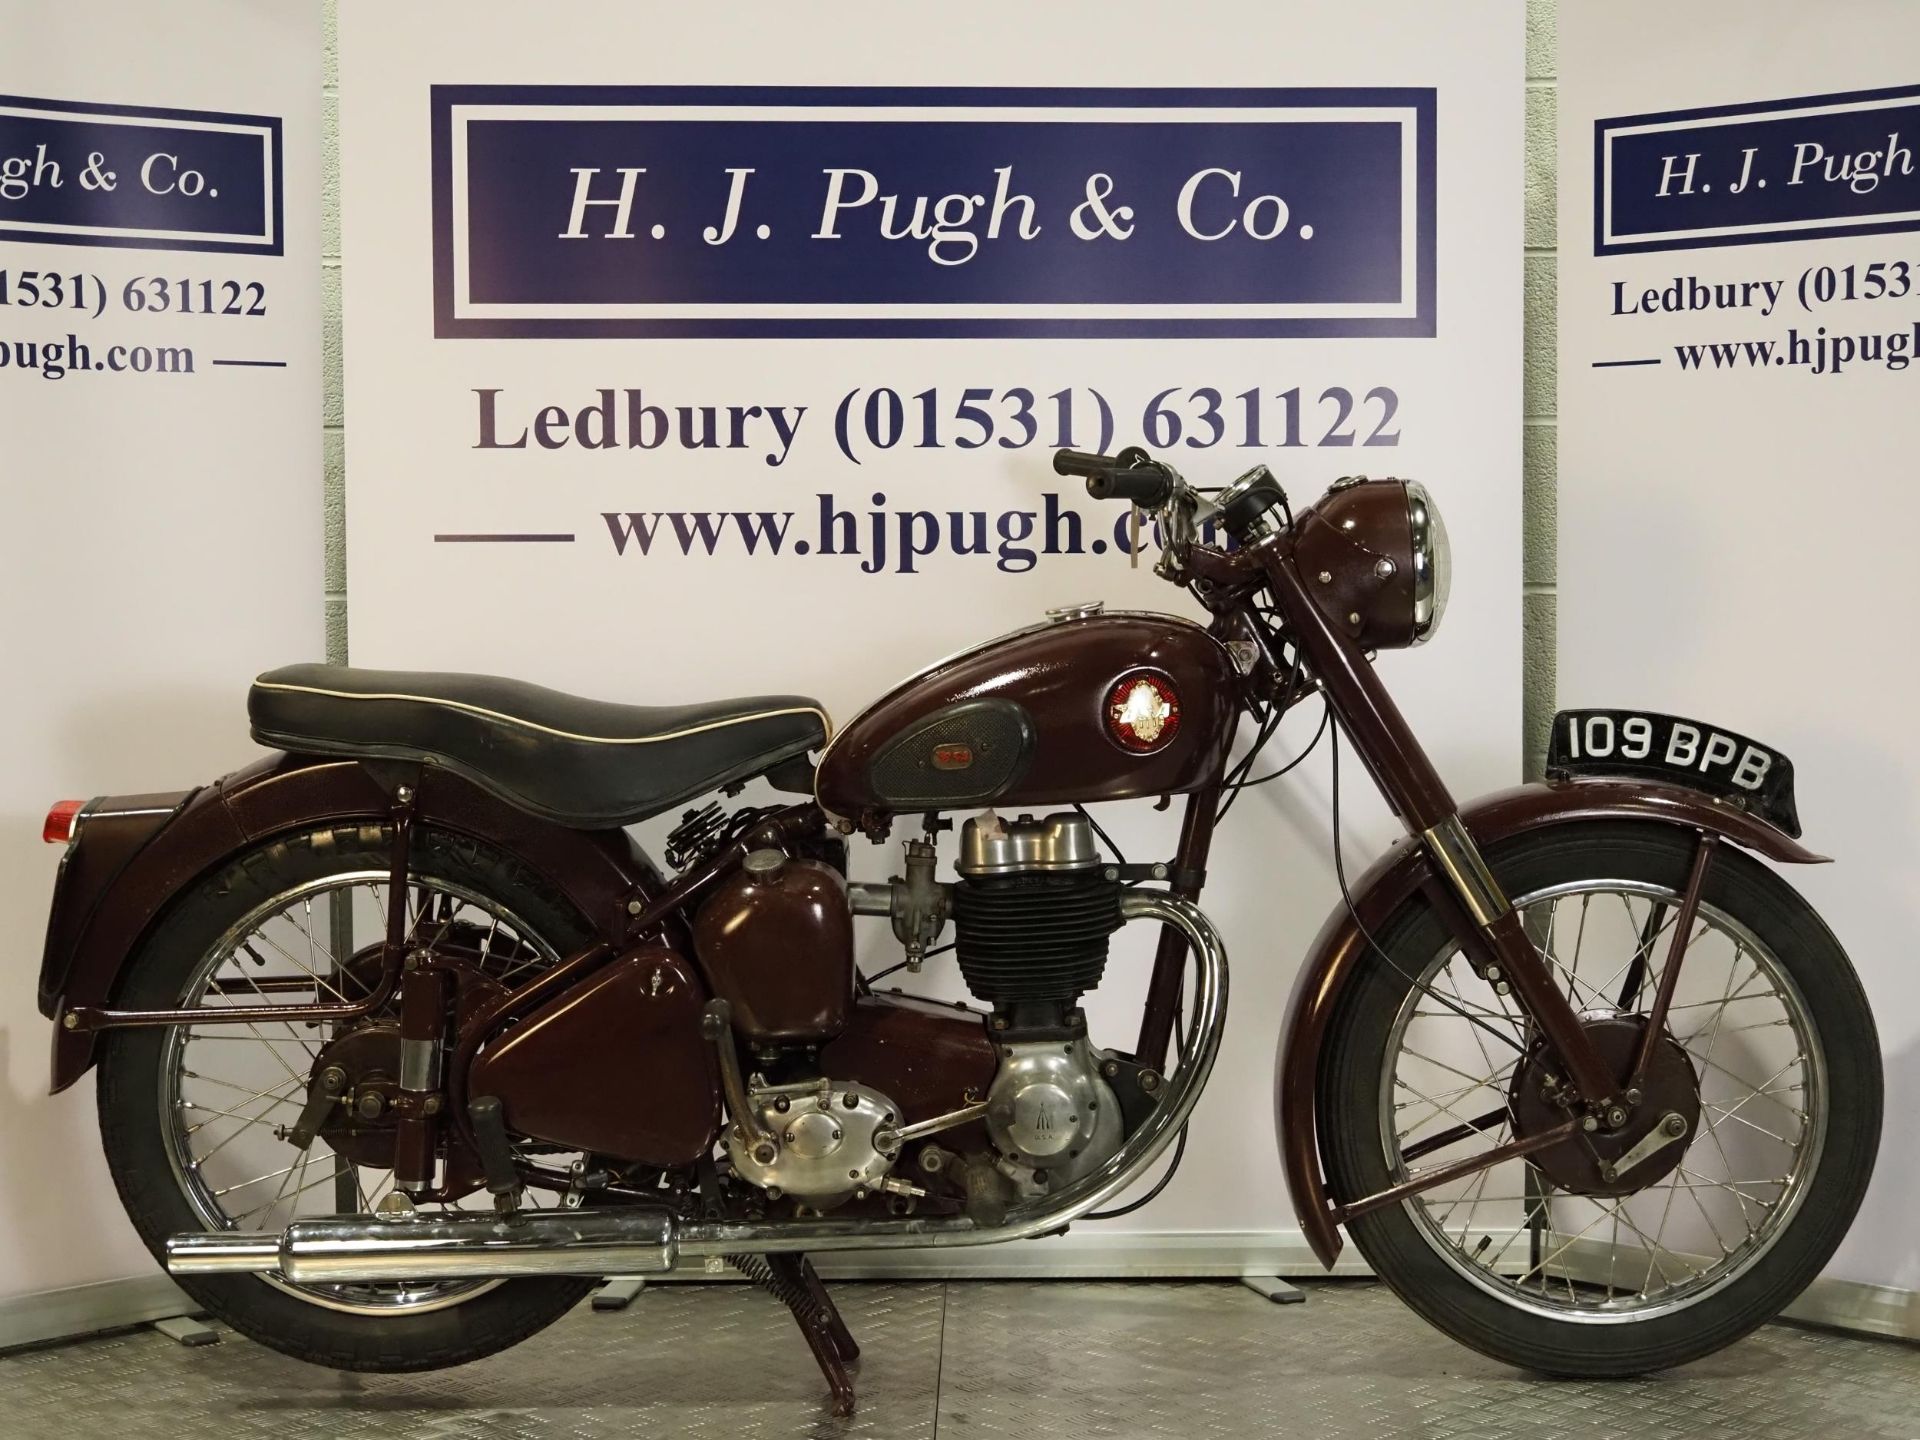 BSA C11G motorcycle. 1956. 250cc. Frame No. BC115416998 Engine No. BC11G22568 Engine turns over with